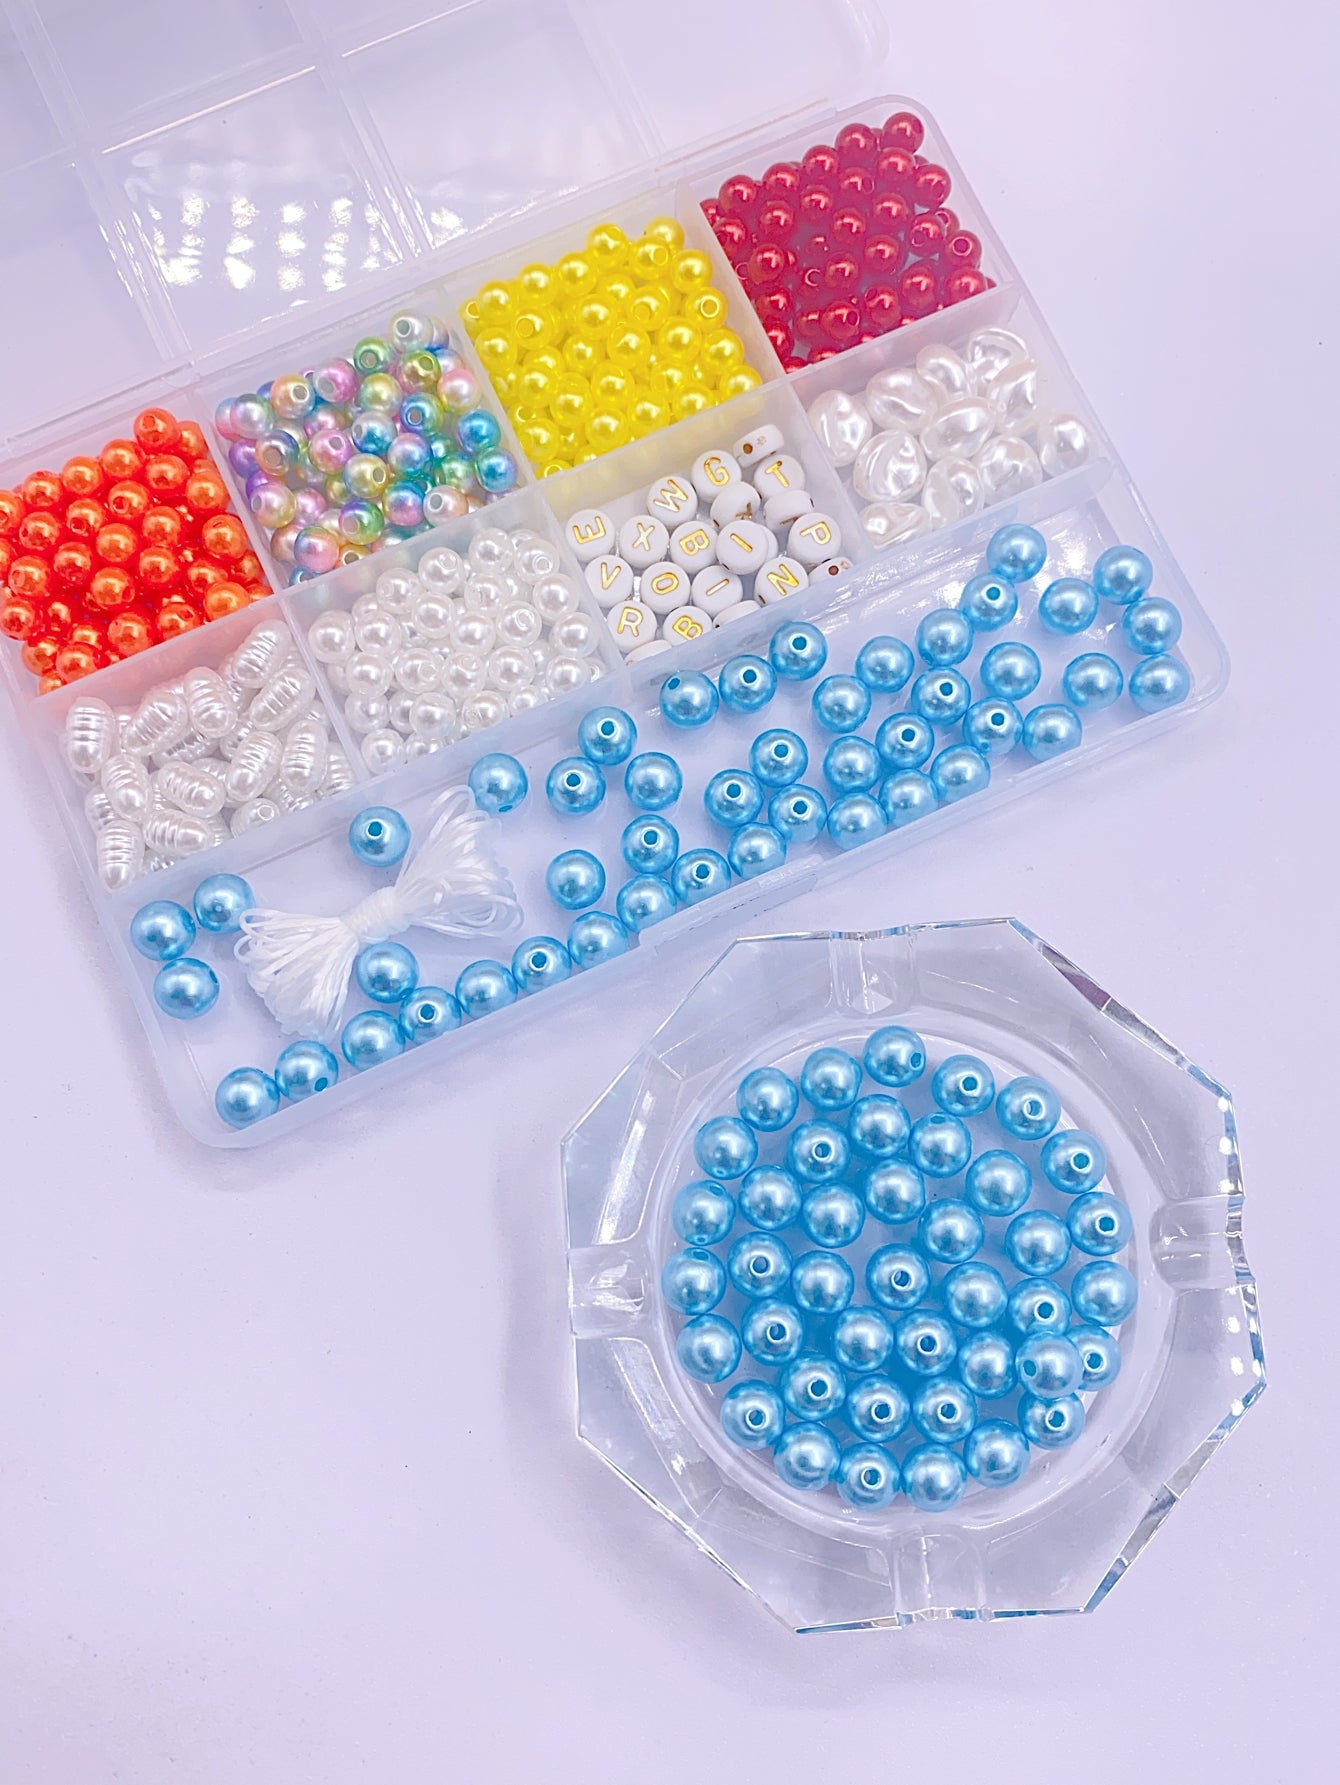 New multi-palace grid mixed box series straight hole highlight multiple straight hole pearl diy jewelry beaded material box